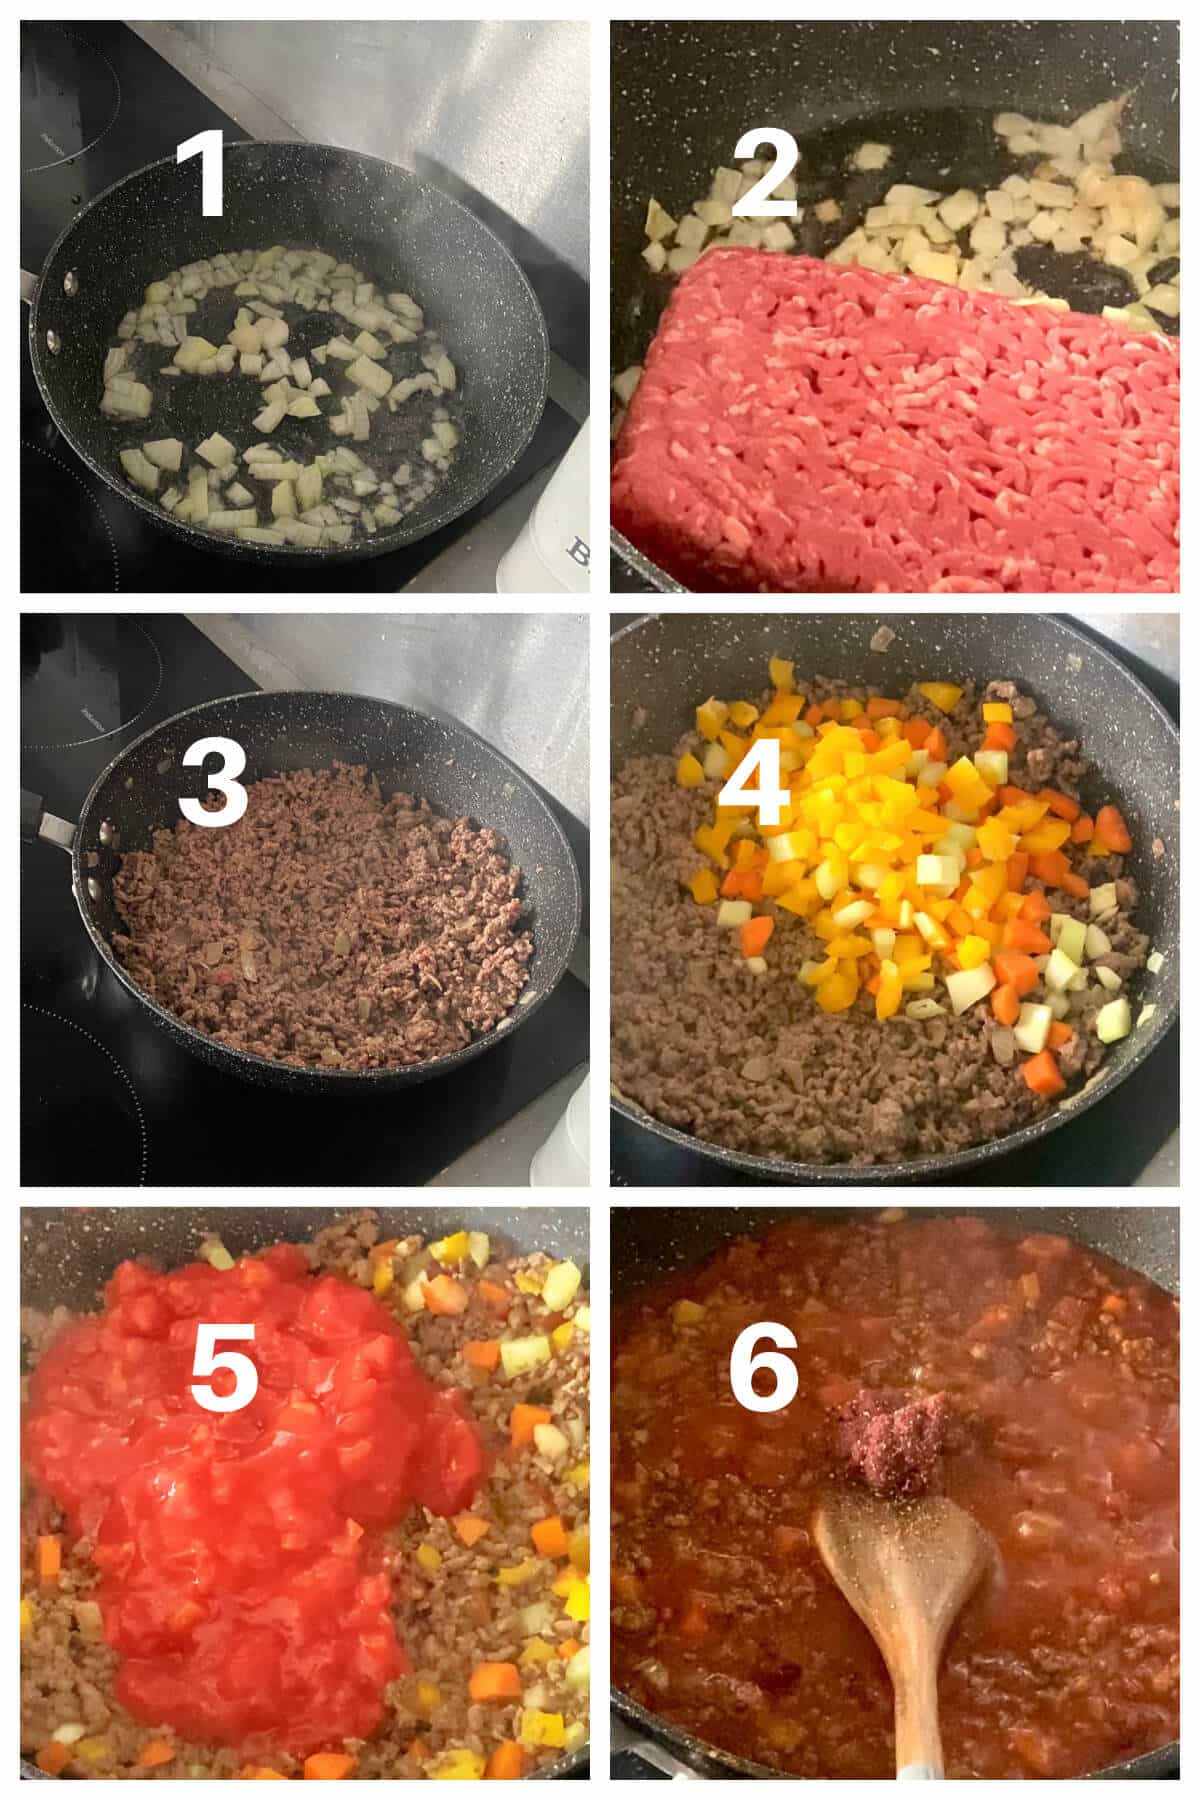 Collage of 6 photos to show how to make bolgonese sauce.